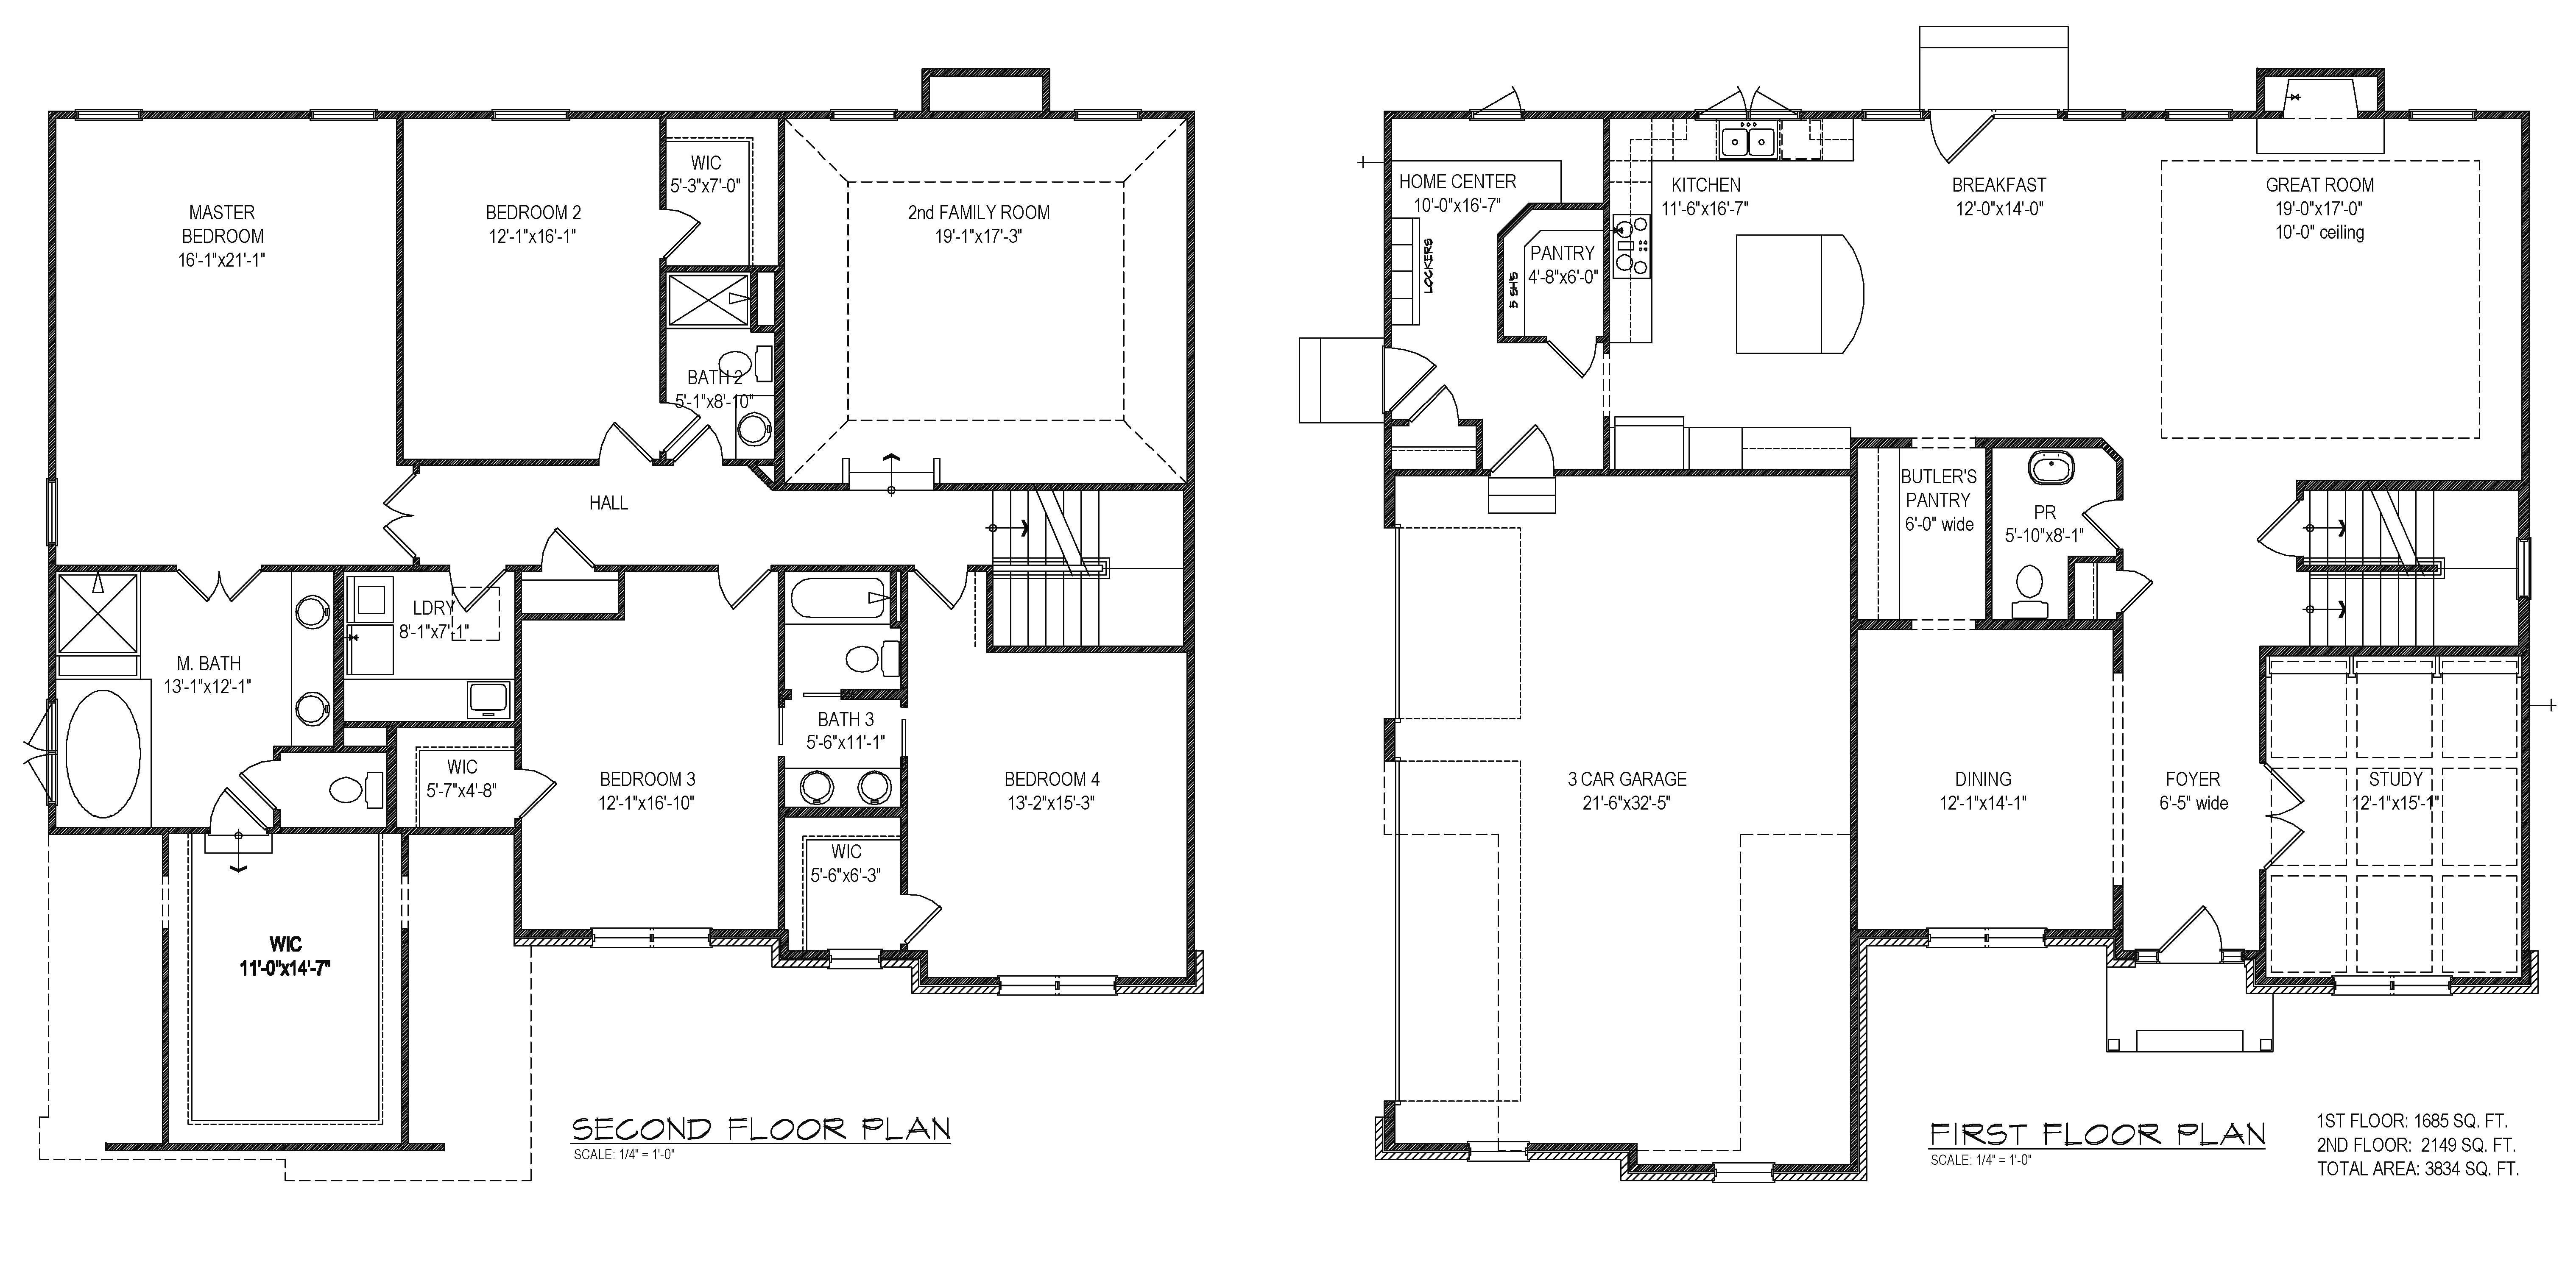 Drawing 4 Bedroom House 30 Awesome 4 Bedroom House Plan Plan Floor Plan Design